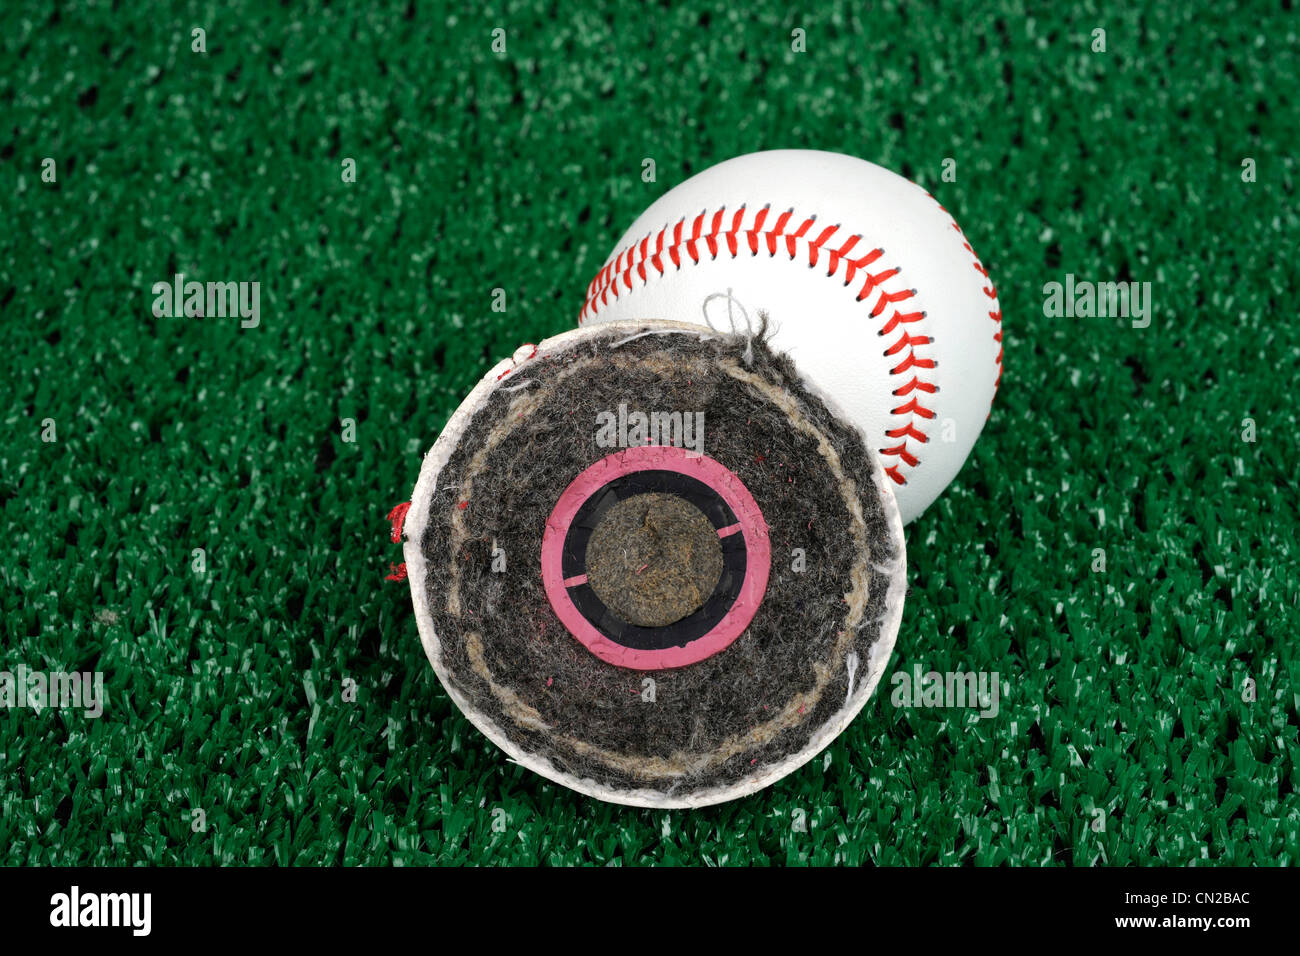 Cross section of a Rawlings Major league baseball. Has a cork center encased in two rubber layers, layers of yarn, leather cover Stock Photo